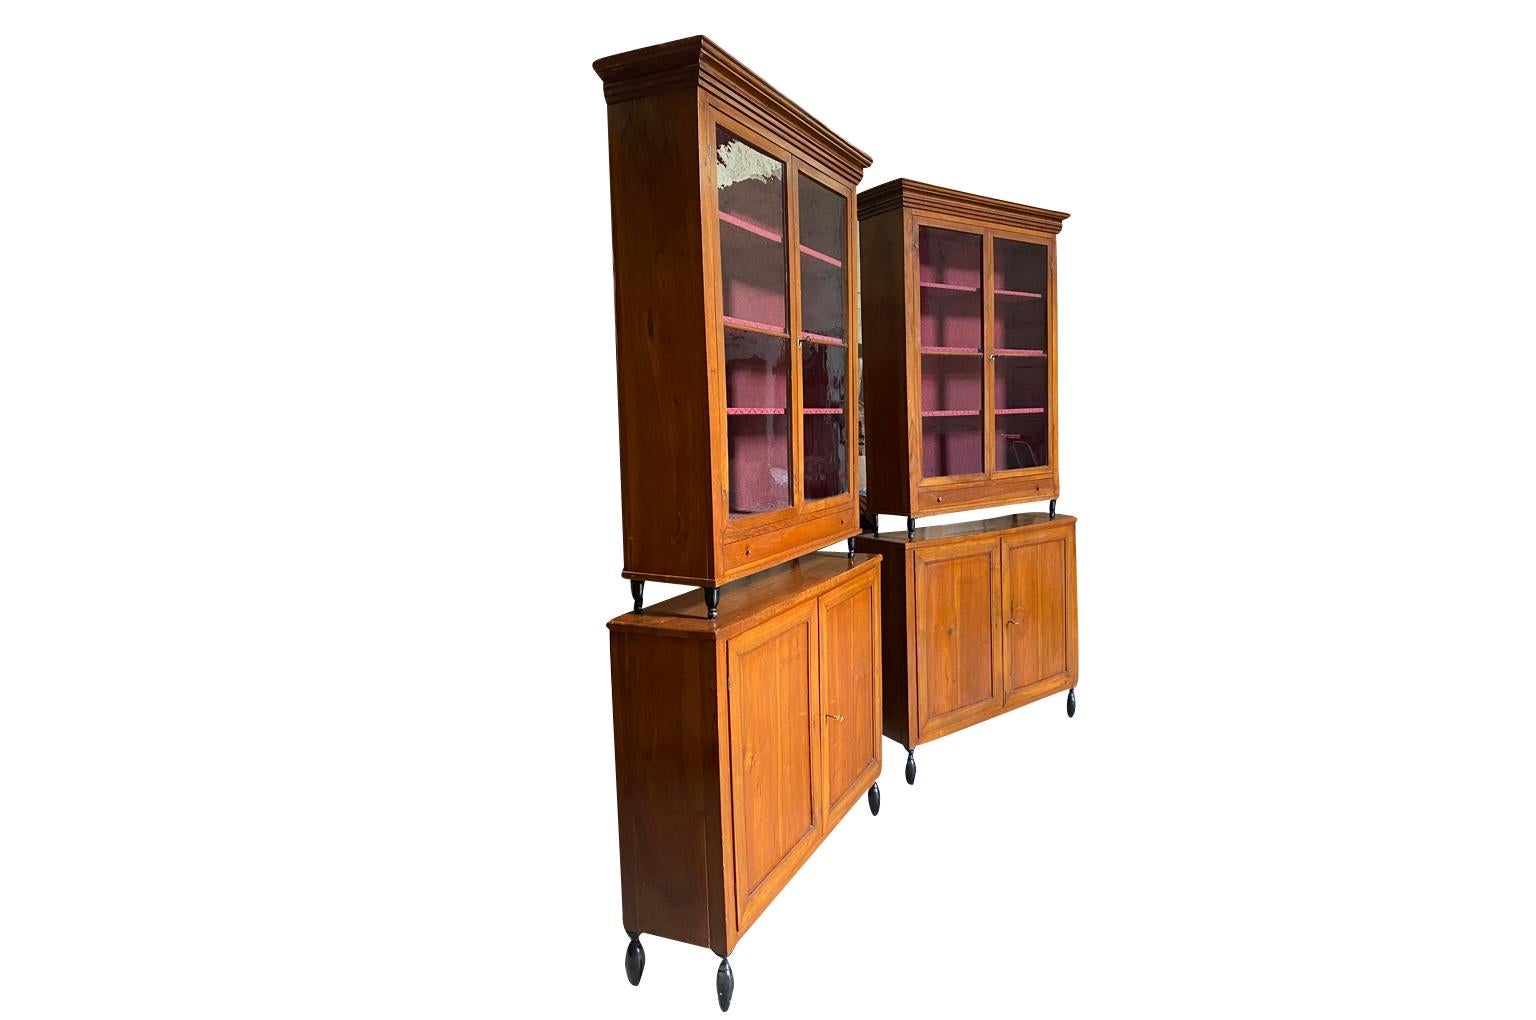 A very elegant pair of early 19th century Deux Corps Bibliotheque - Bookcase from the Veneto region of Italy, Beautifully constructed from stunning walnut. The upper sections retaining their original glass panes, drawers and shelving. The lower